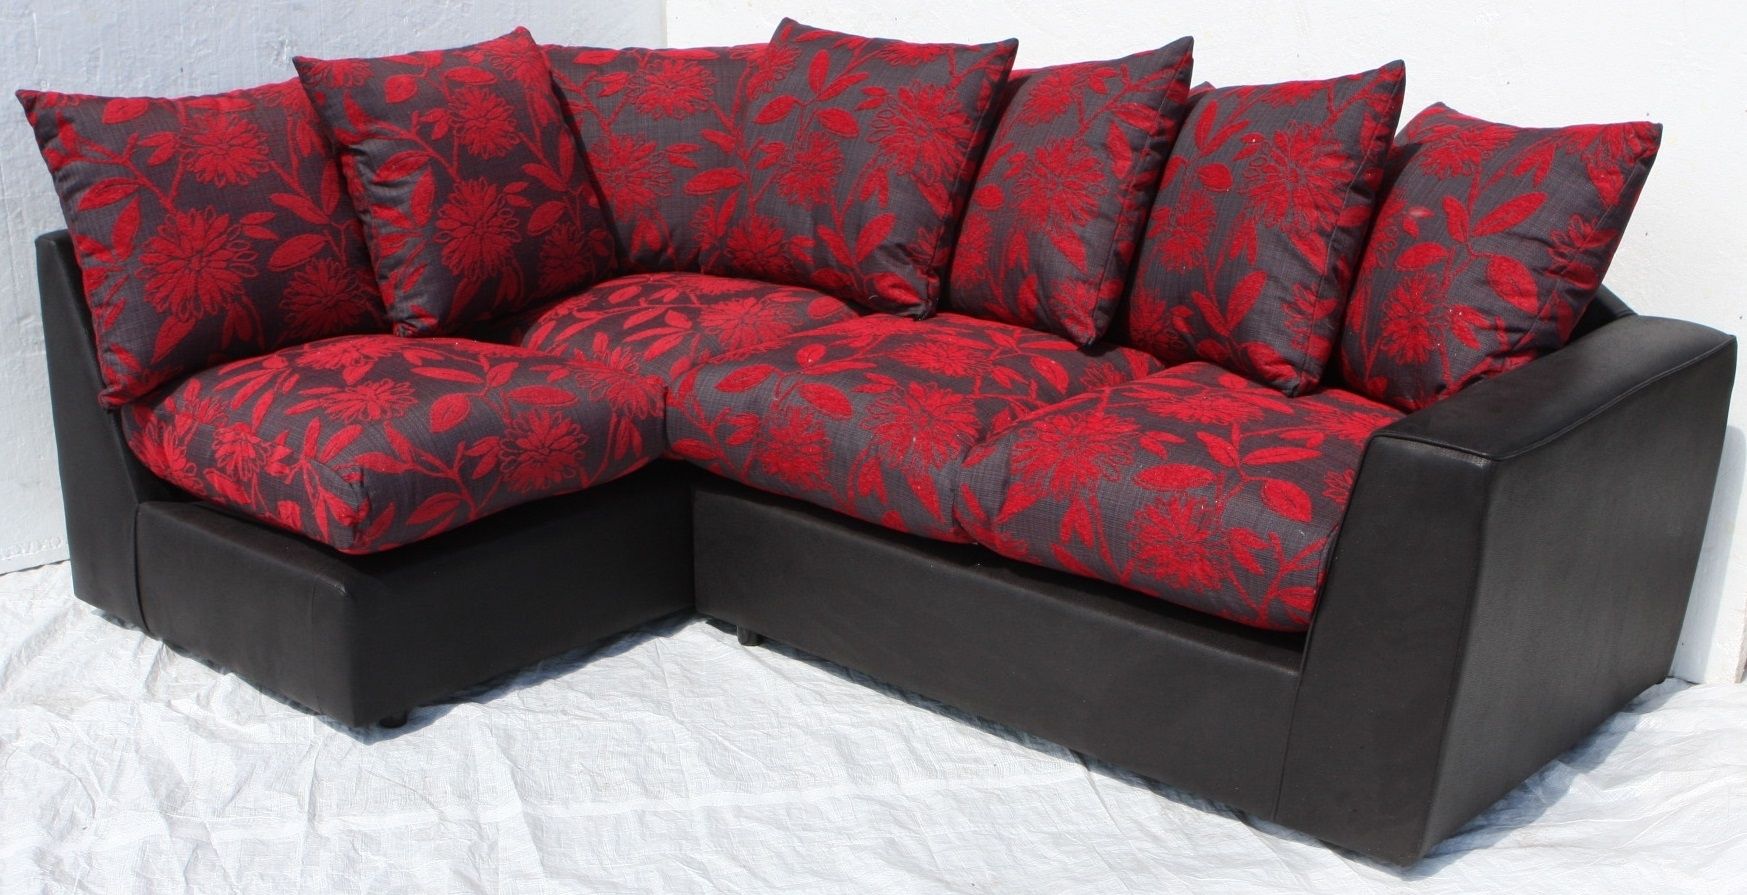 Helibeds Same Day Or Next Day Delivery Of – Sofa's – Harry Corner Inside Red And Black Sofas (View 7 of 10)